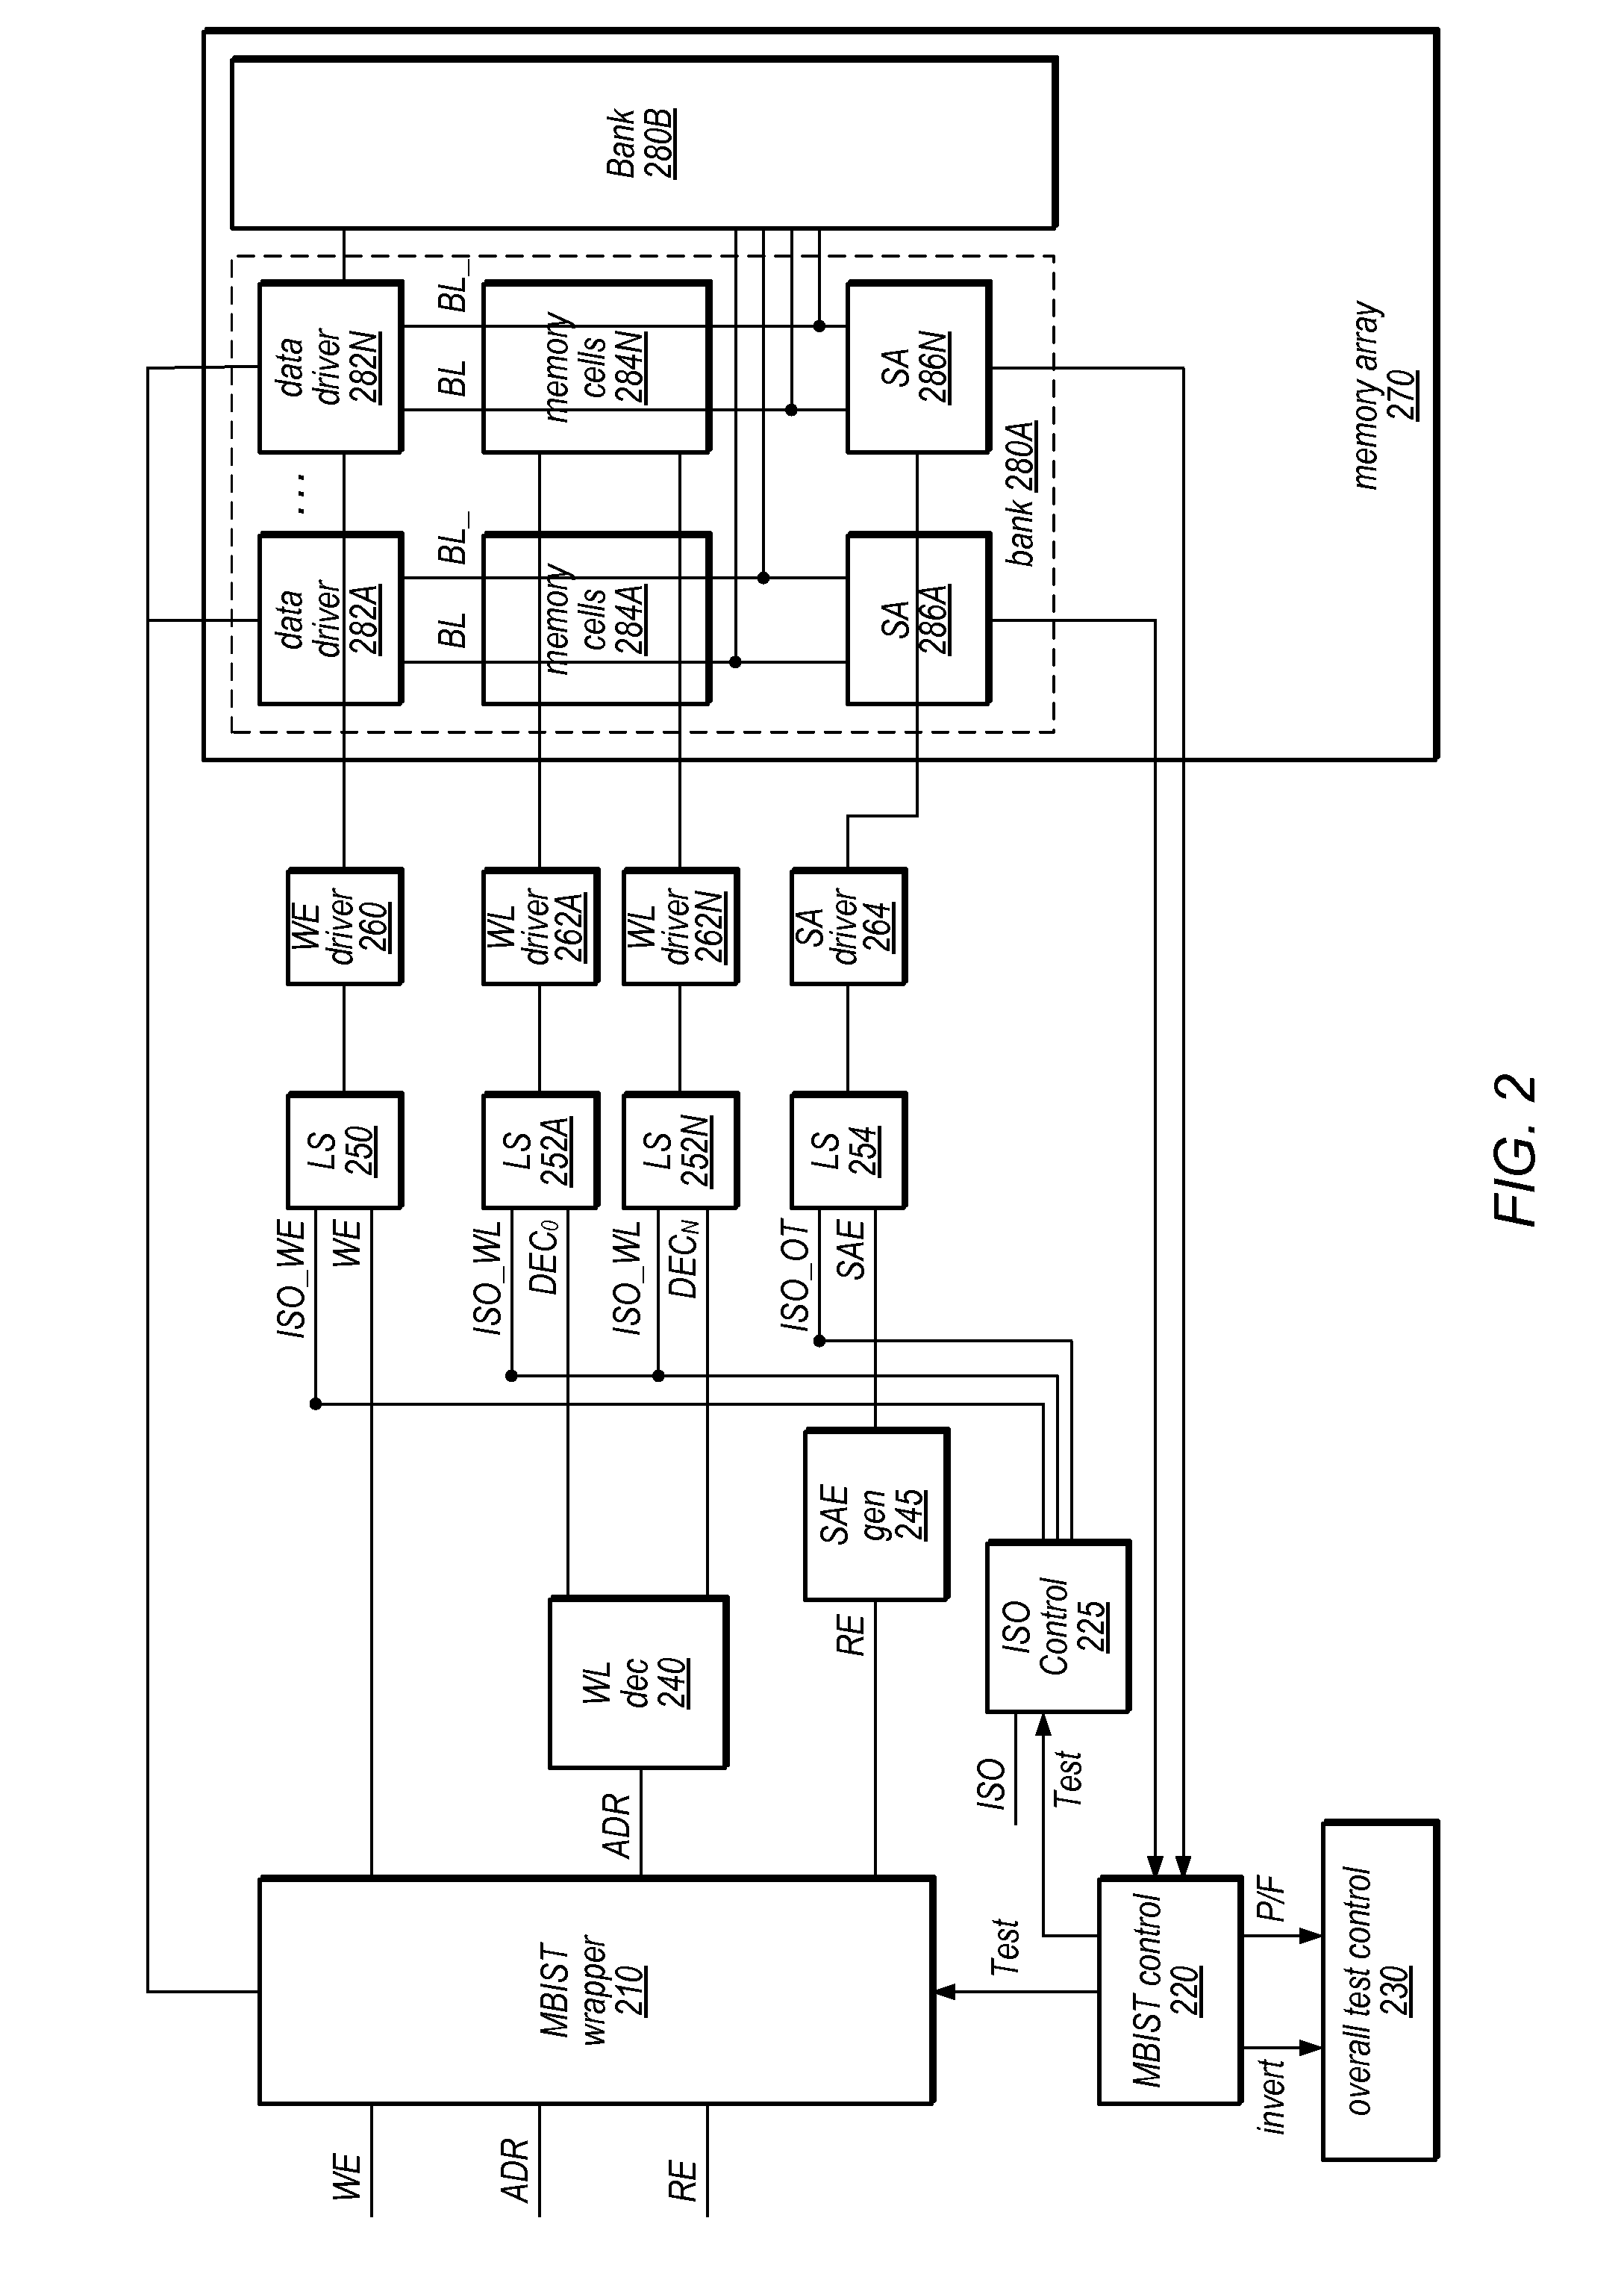 Performing Stuck-At Testing Using Multiple Isolation Circuits